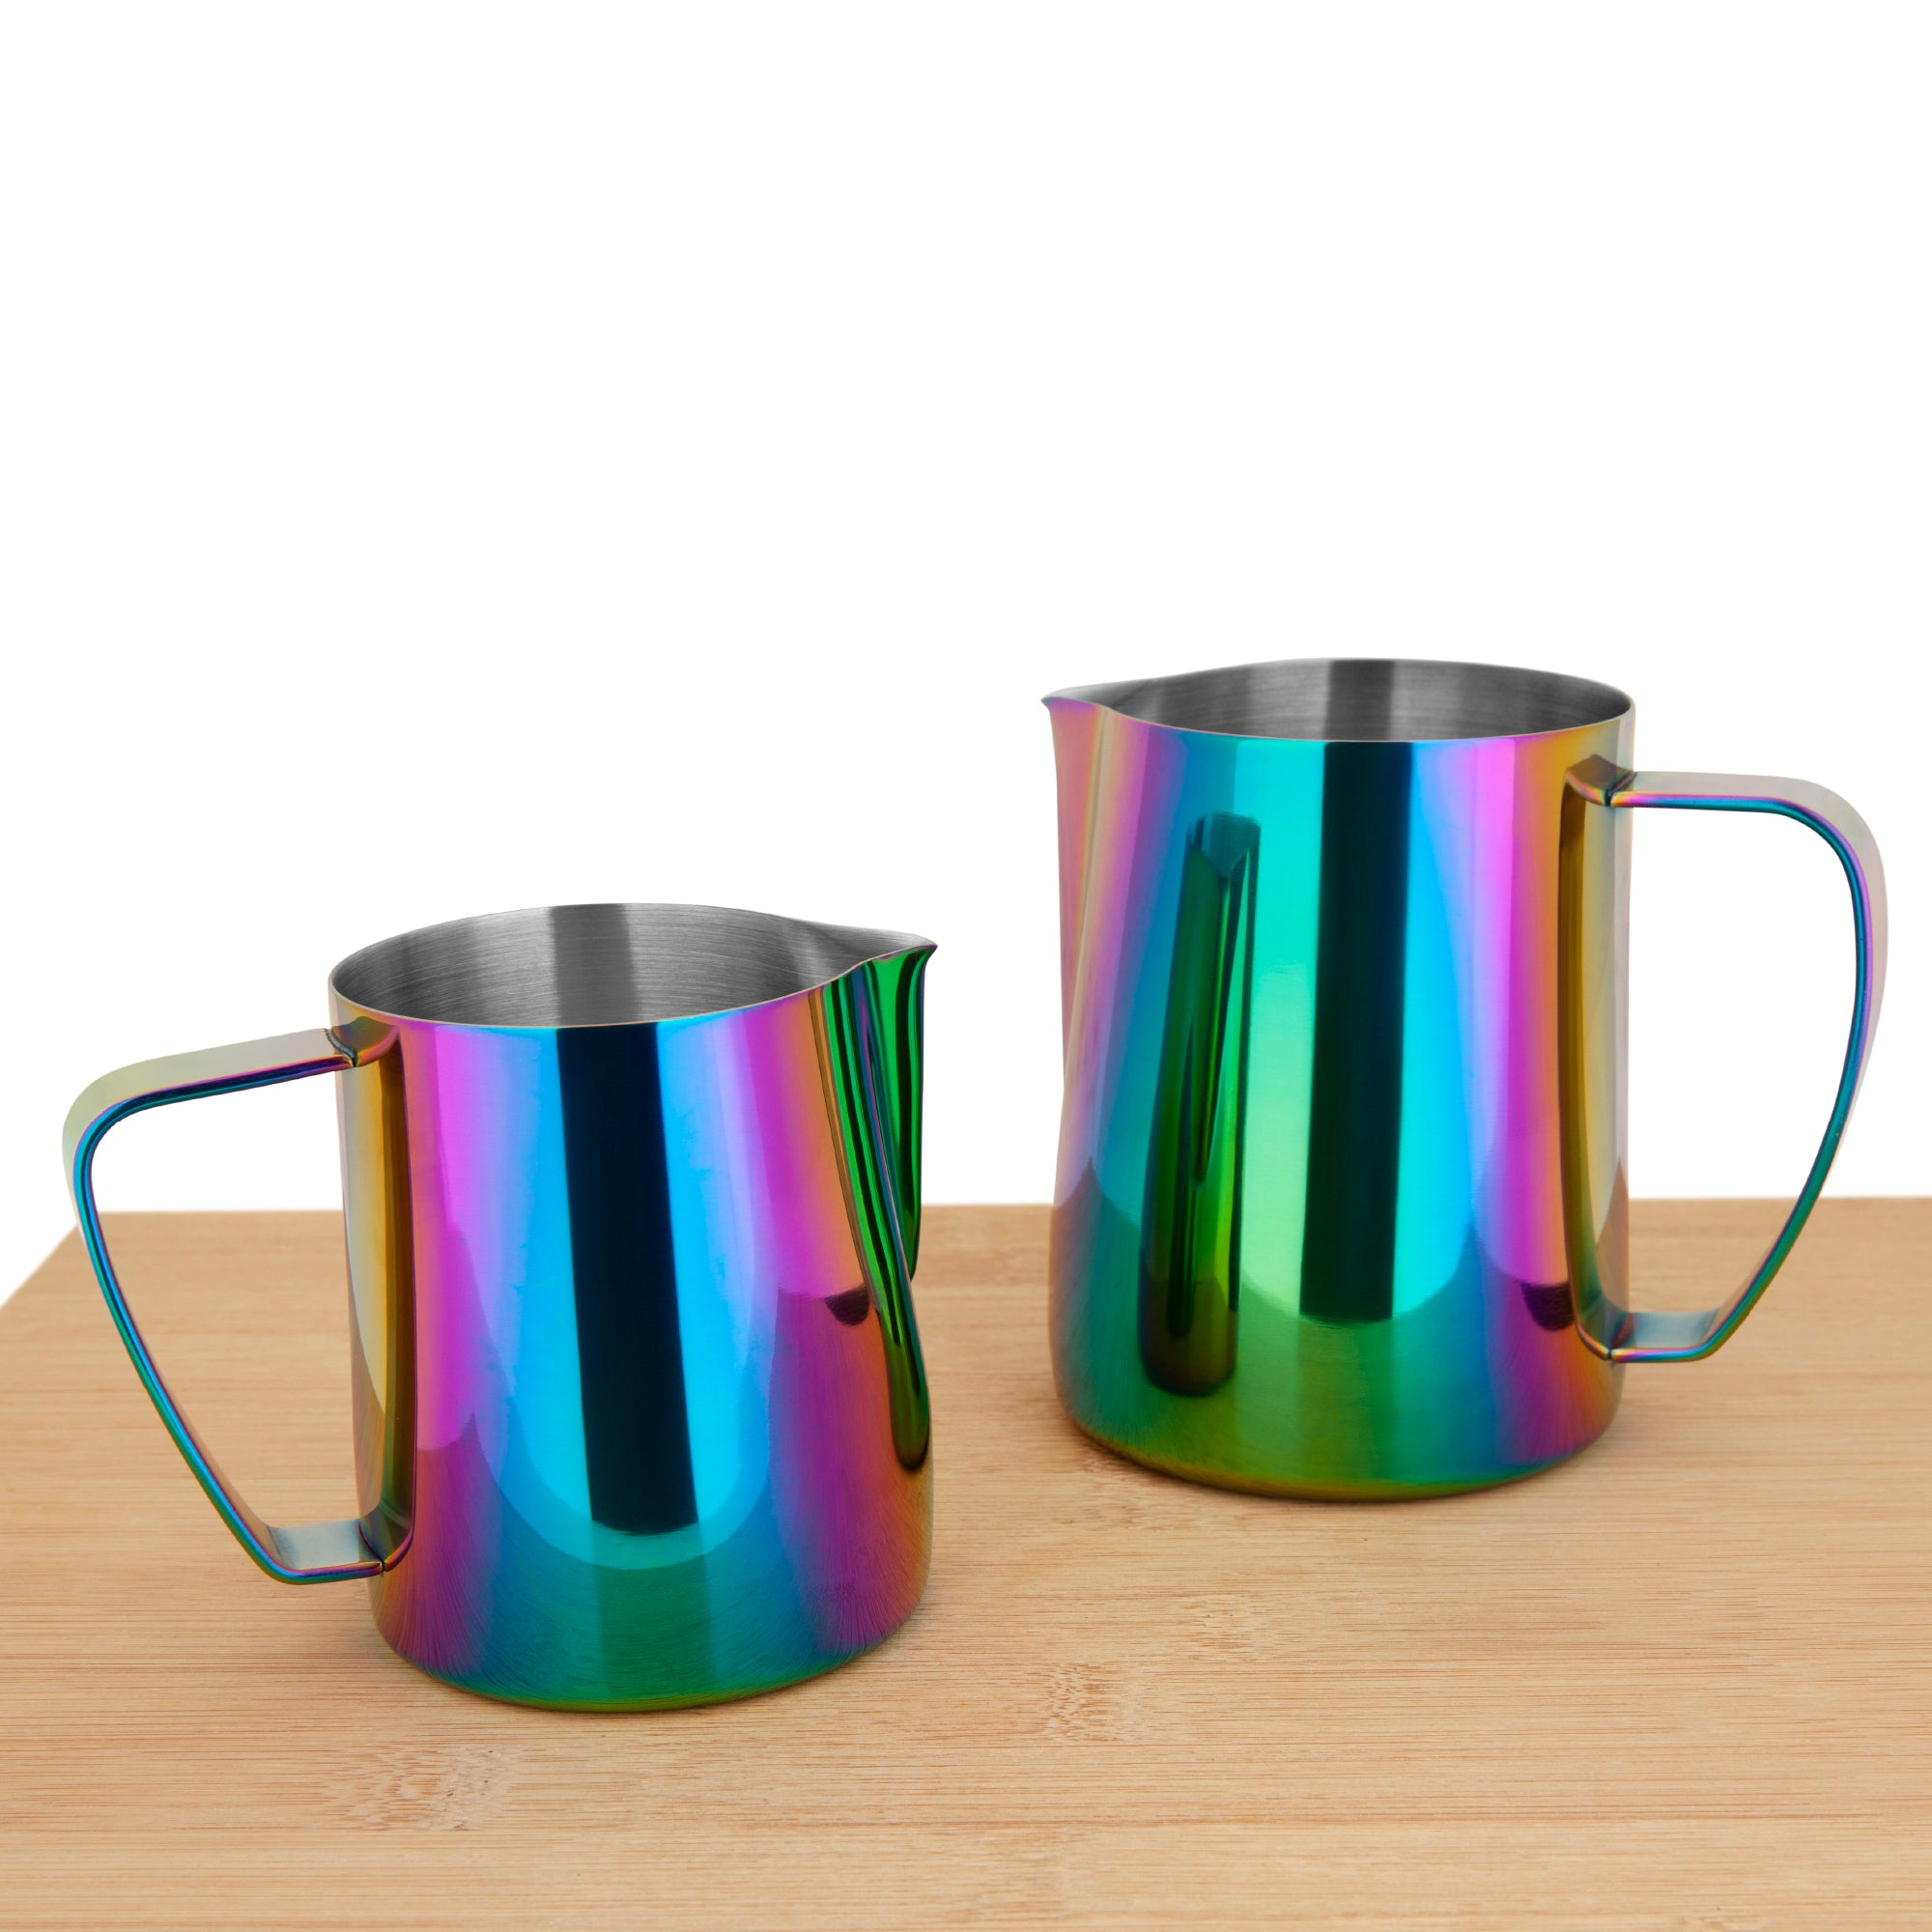 Rainbow Stainless Steel Milk Frothing Pitcher, 12oz